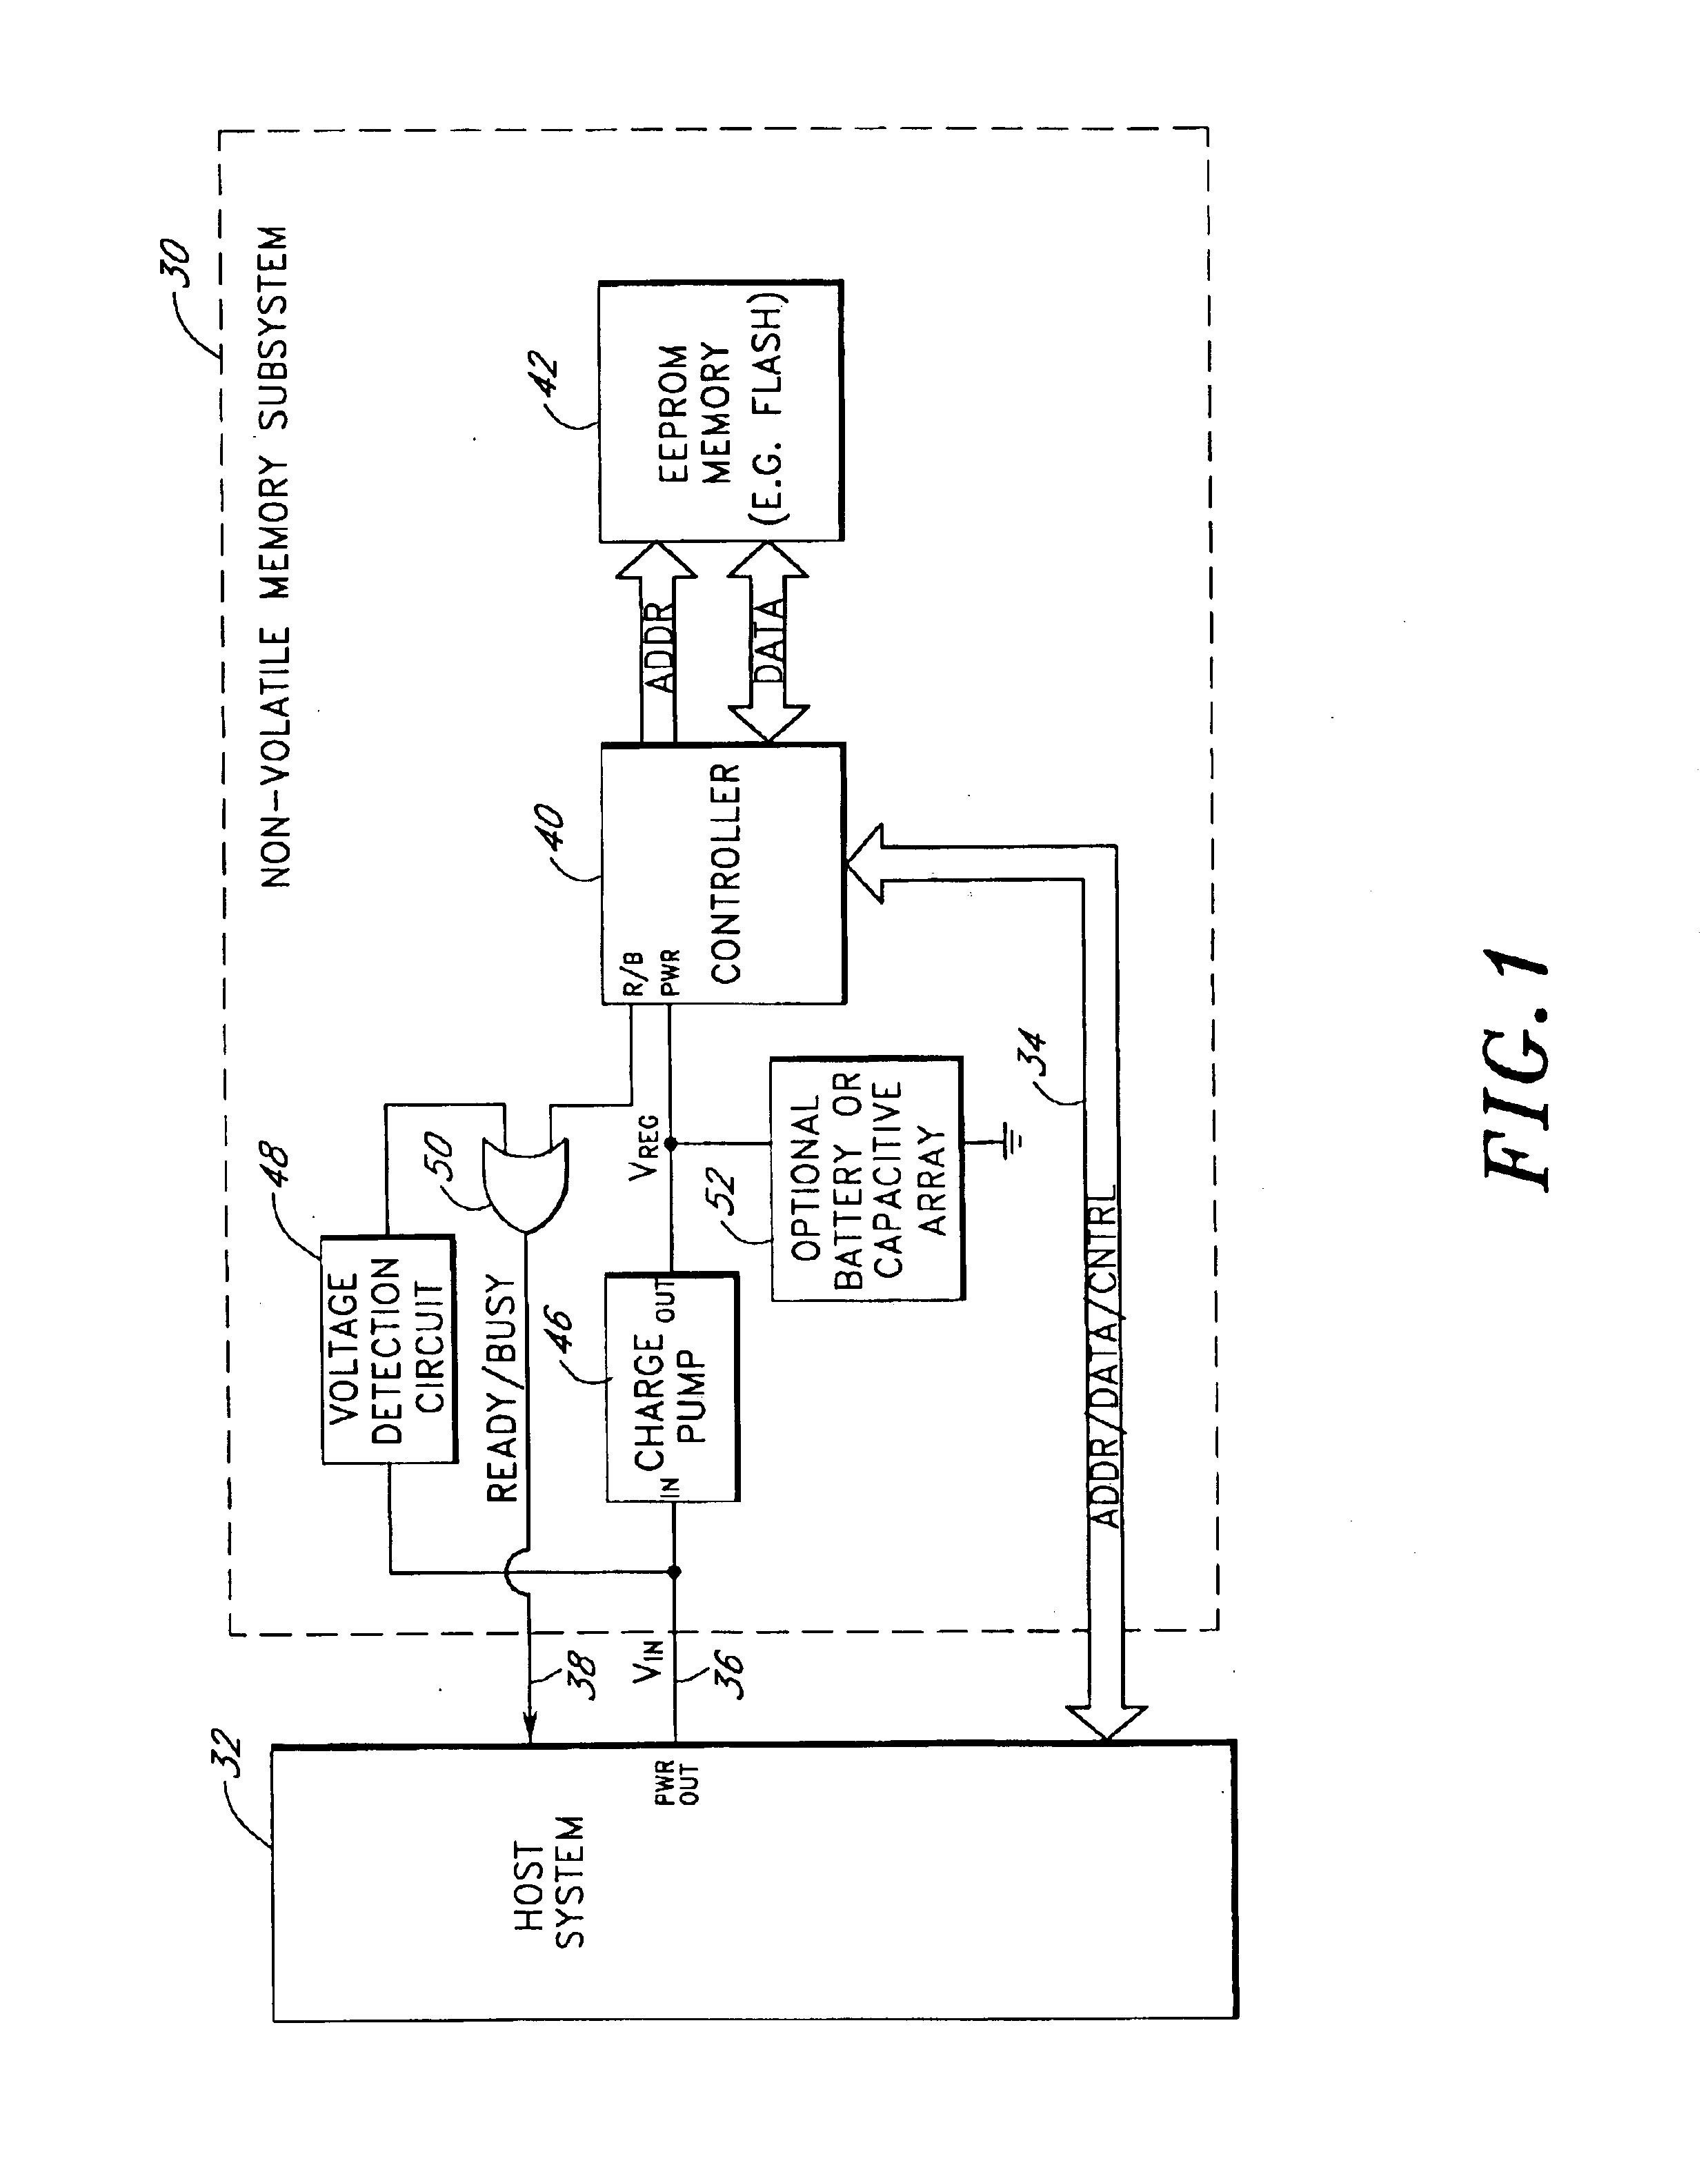 Storage subsystem with embedded circuit for protecting against anomalies in power signal from host